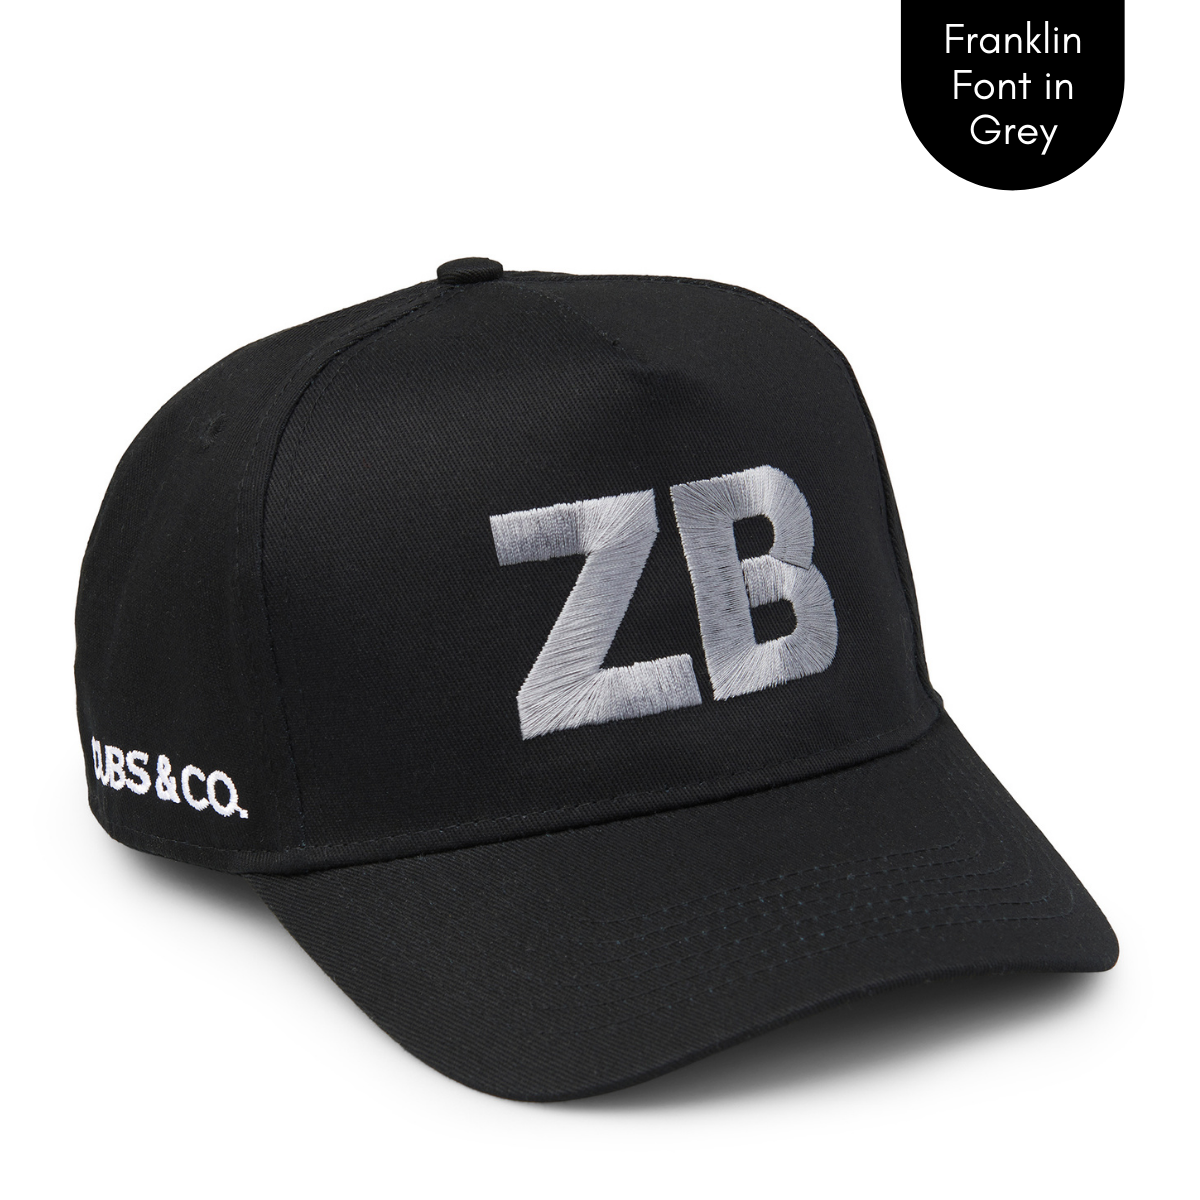 Cubs & Co - PERSONALISED BLACK W/ INITIALS | FRANKLIN GREY PRINT